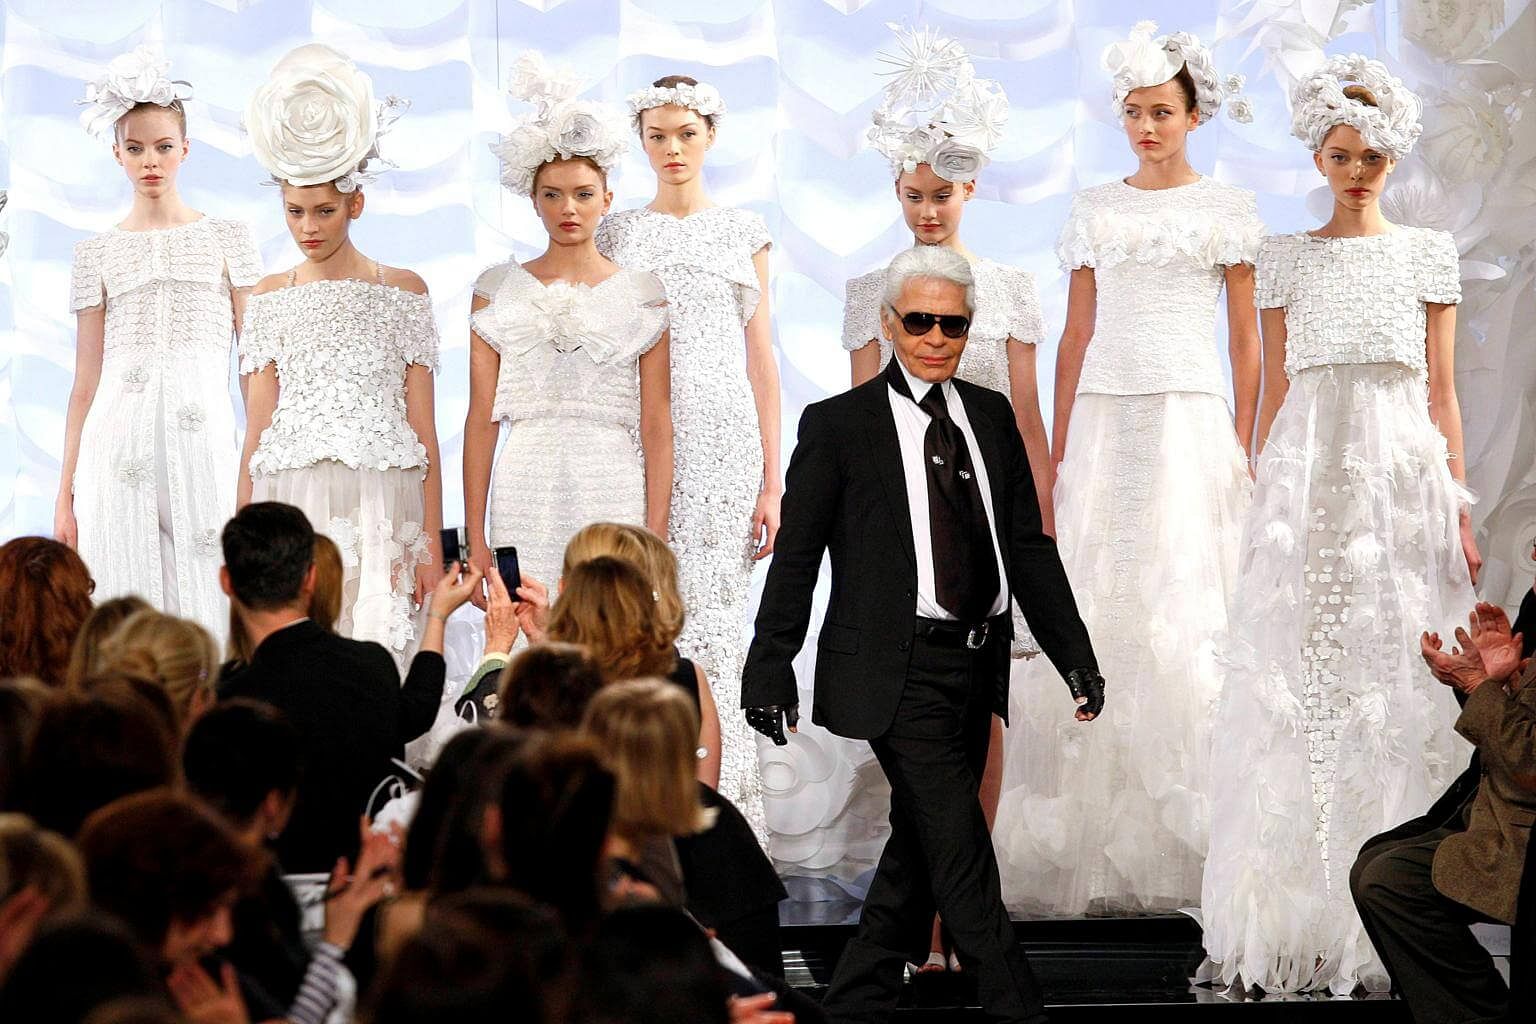 Karl Lagerfeld's sketches from his early career set to fetch up to £2,300  each in upcoming auction | Daily Mail Online